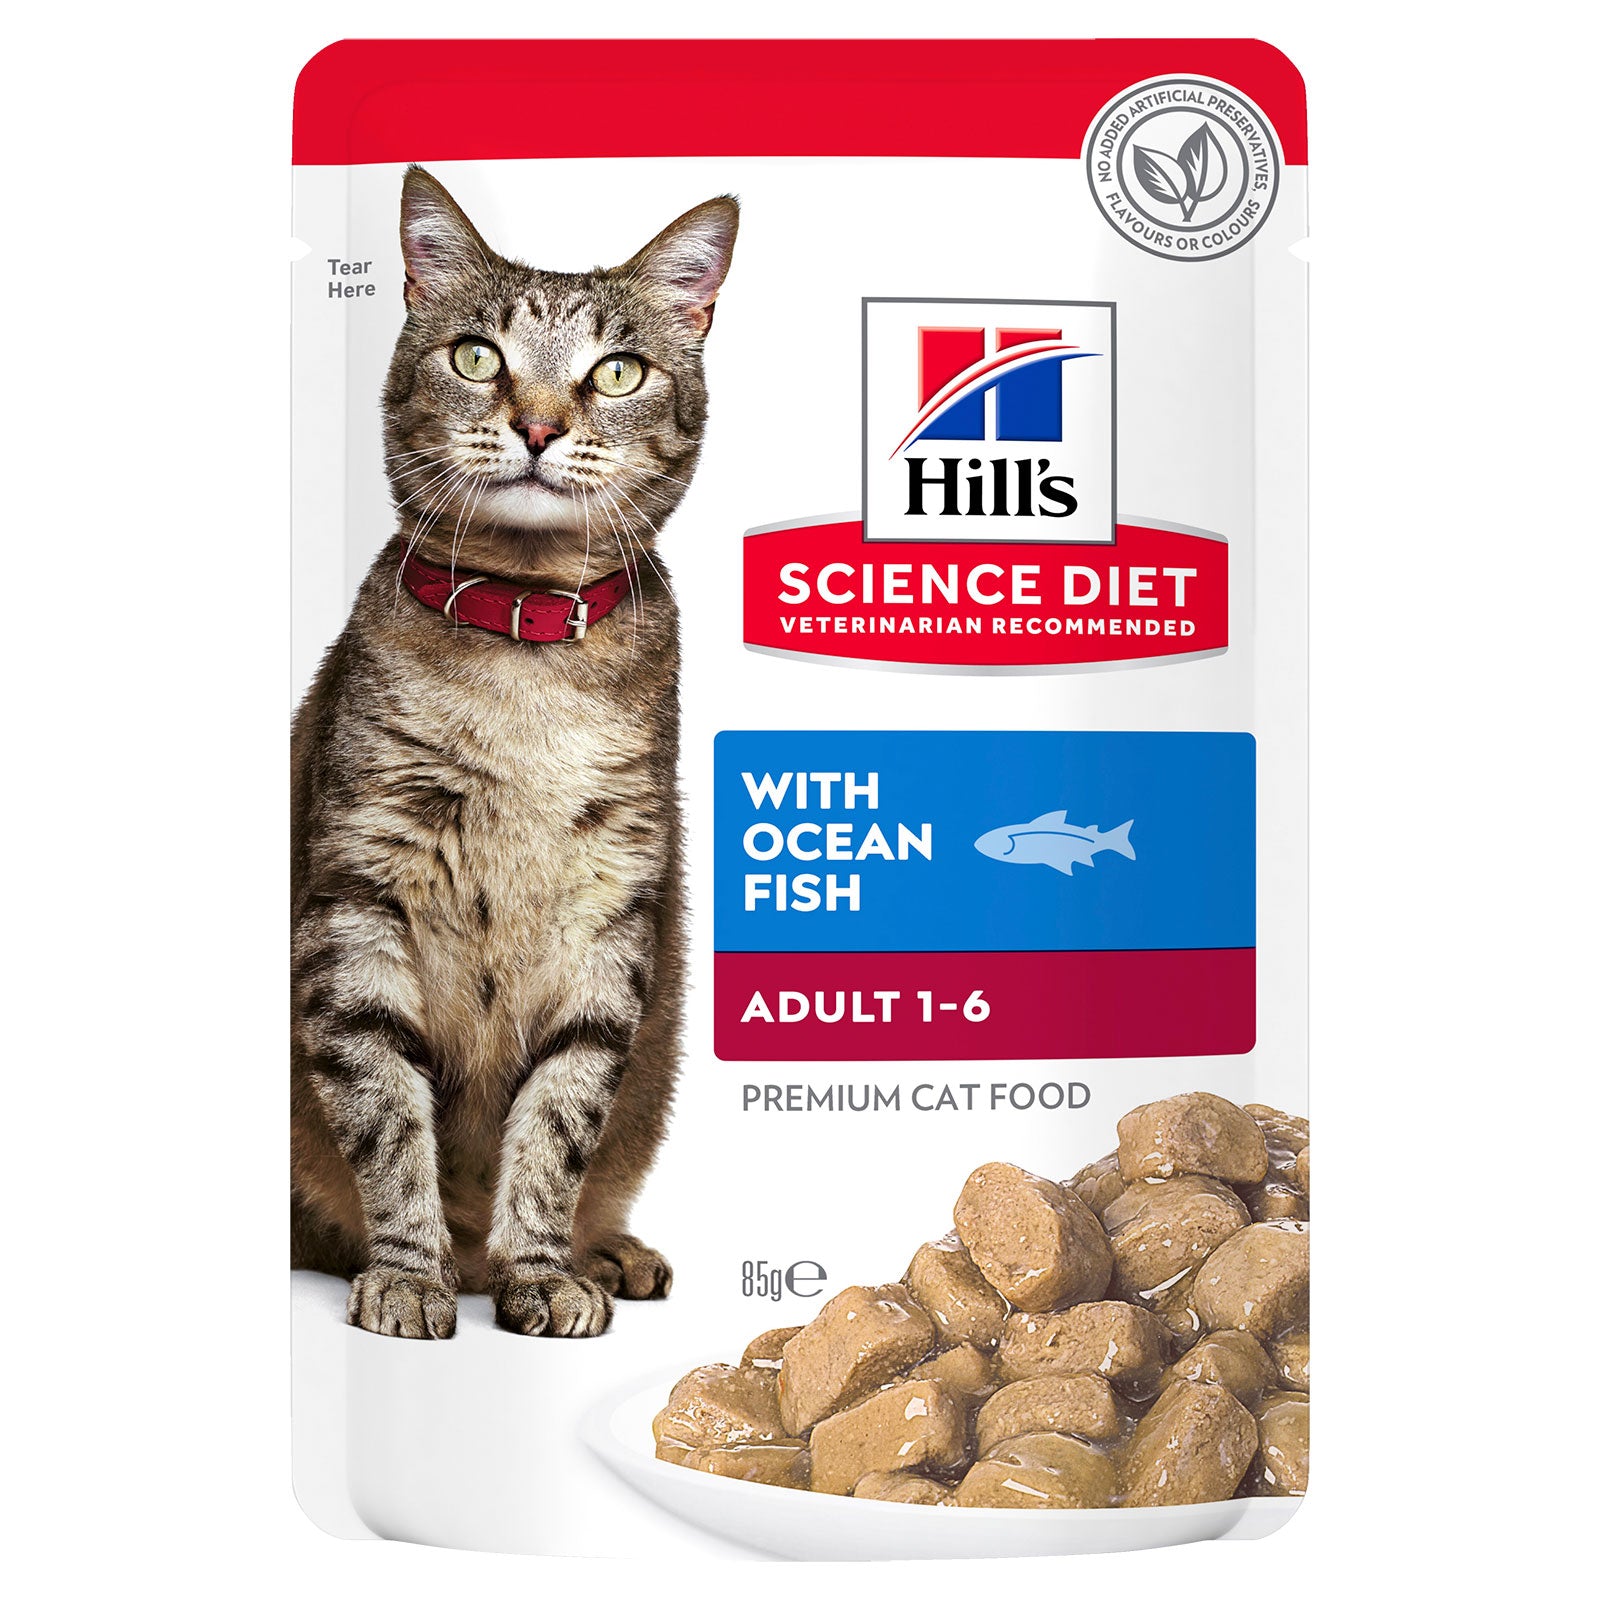 Hill's Science Diet Cat Food Pouch Adult Ocean Fish